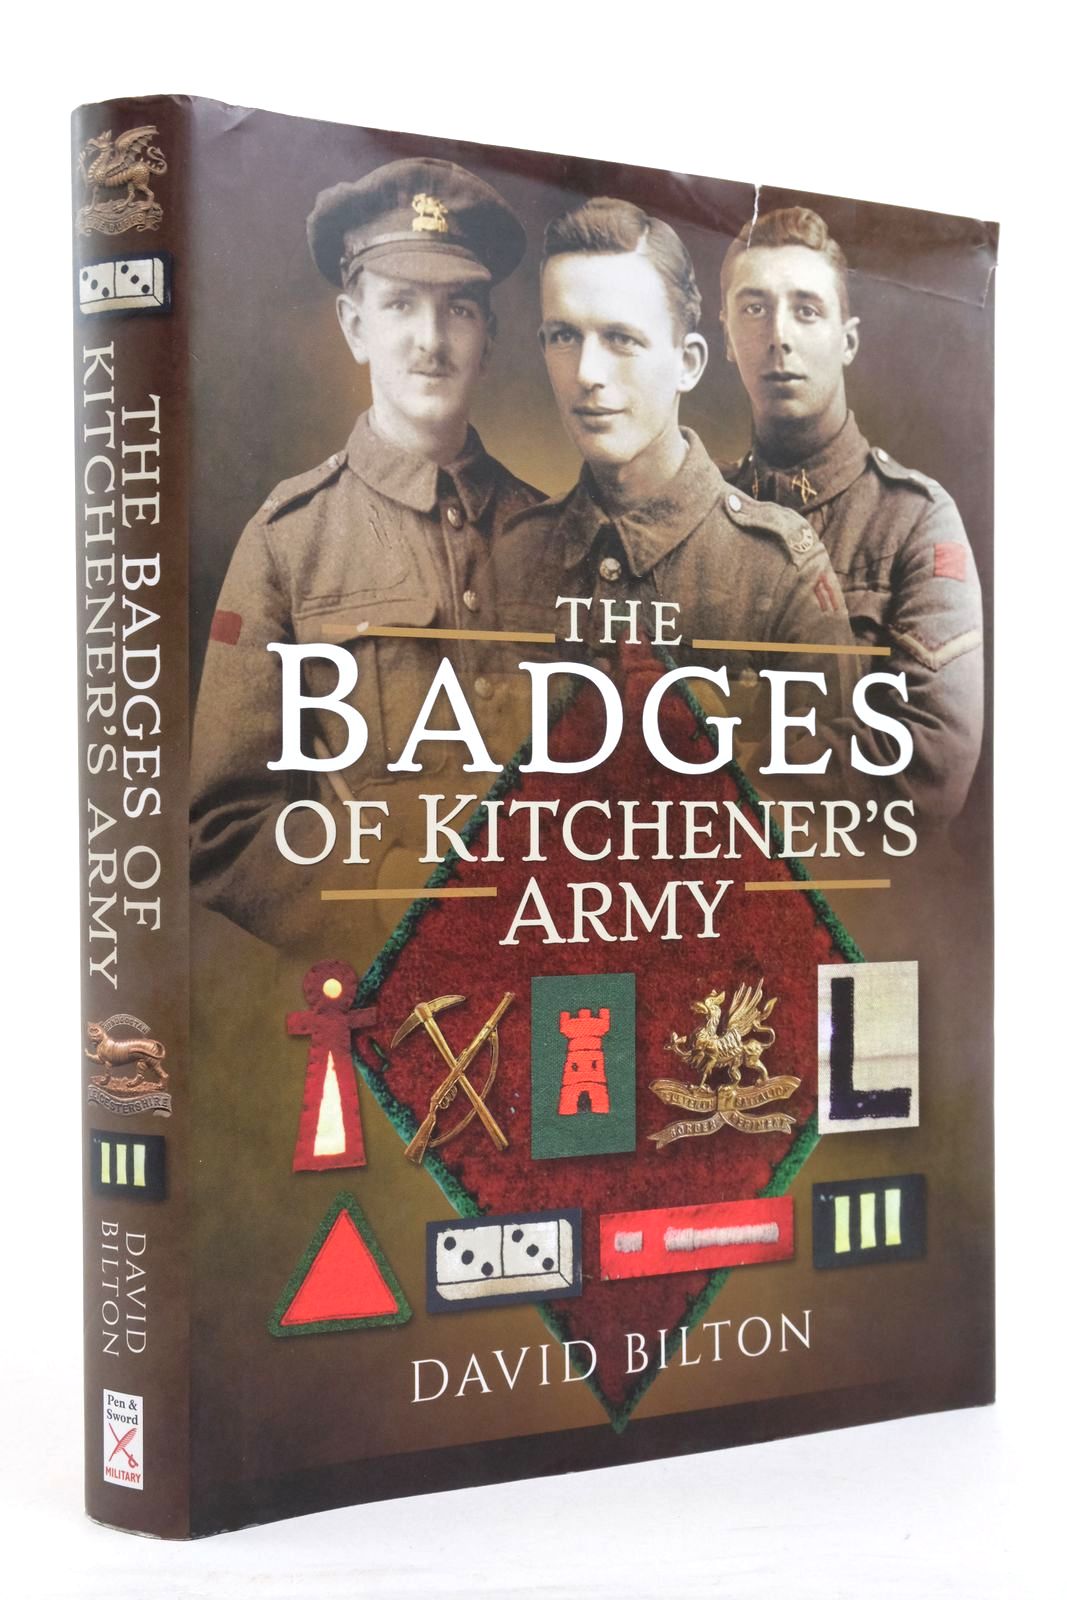 Photo of THE BADGES OF KITCHENER'S ARMY - INFANTRY written by Bilton, David published by Pen & Sword Military (STOCK CODE: 2138362)  for sale by Stella & Rose's Books